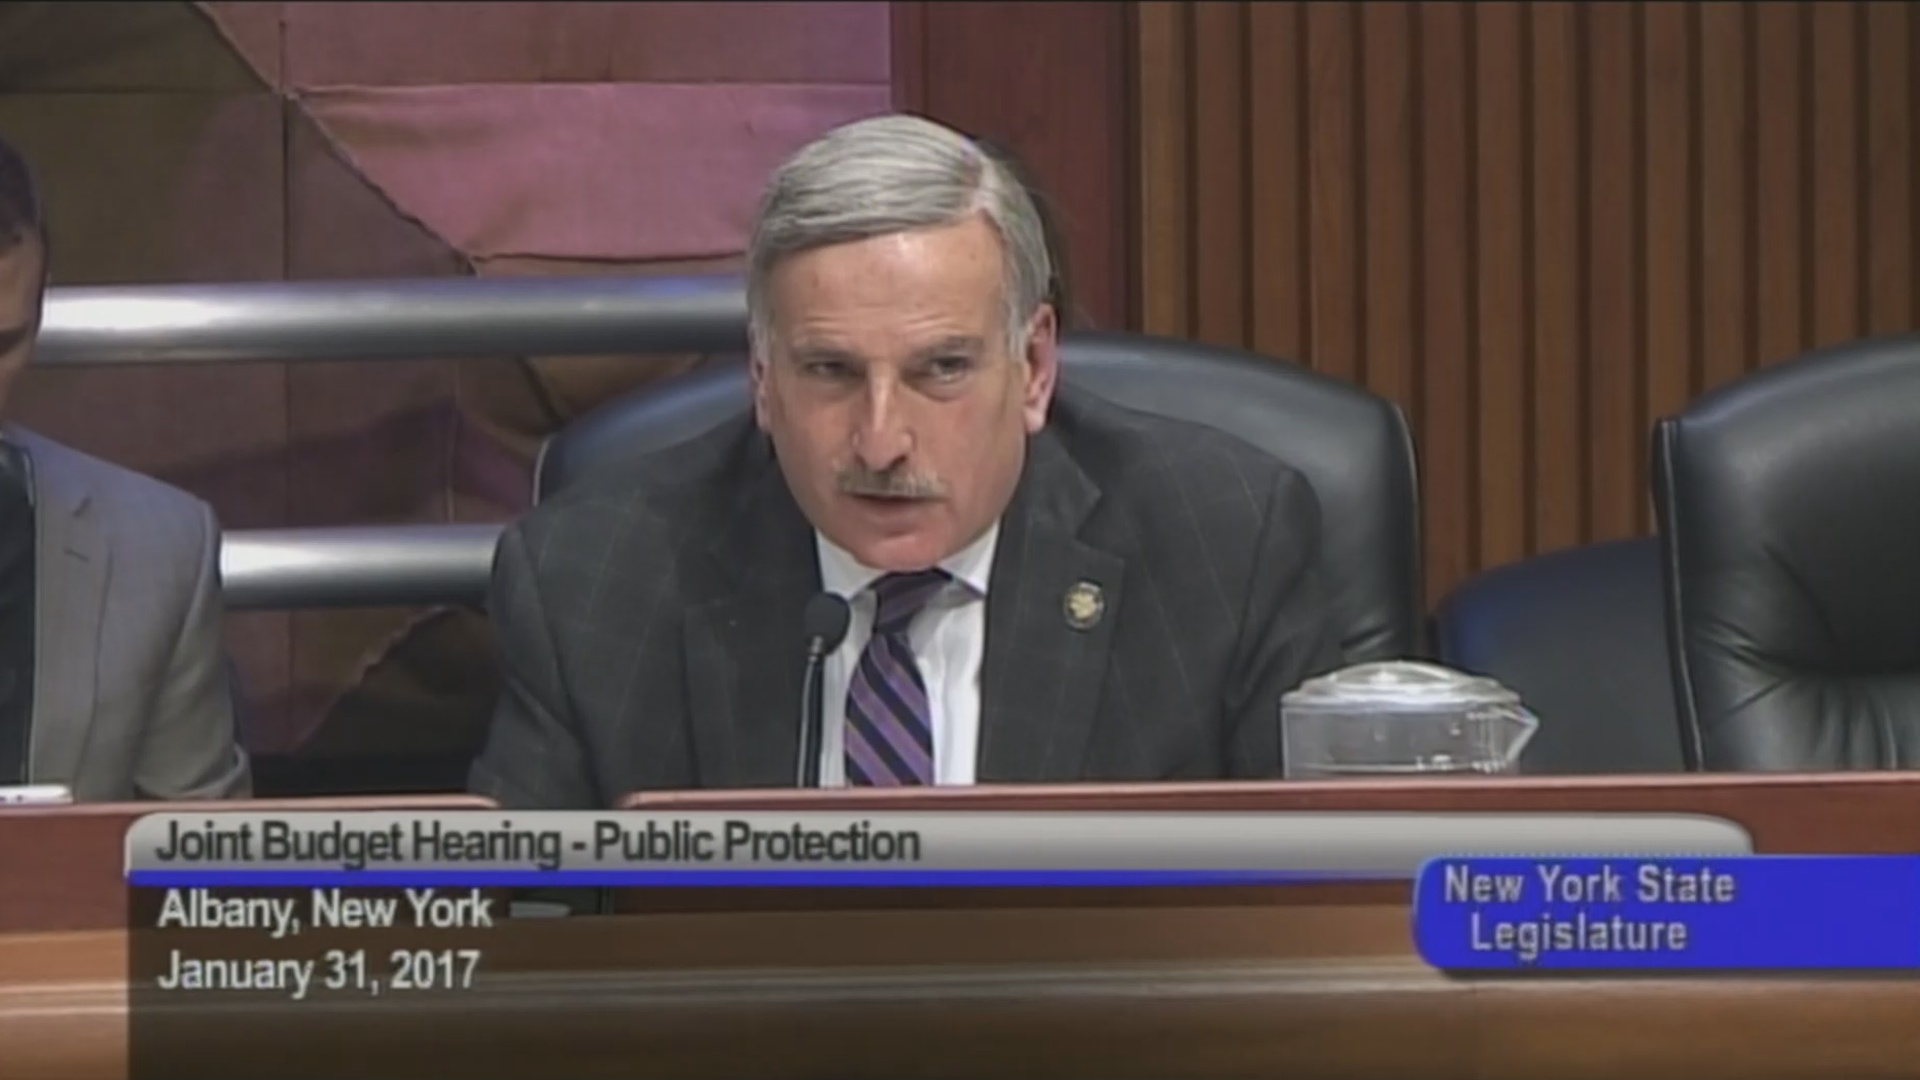 Budget Hearing On Funding Public Protection